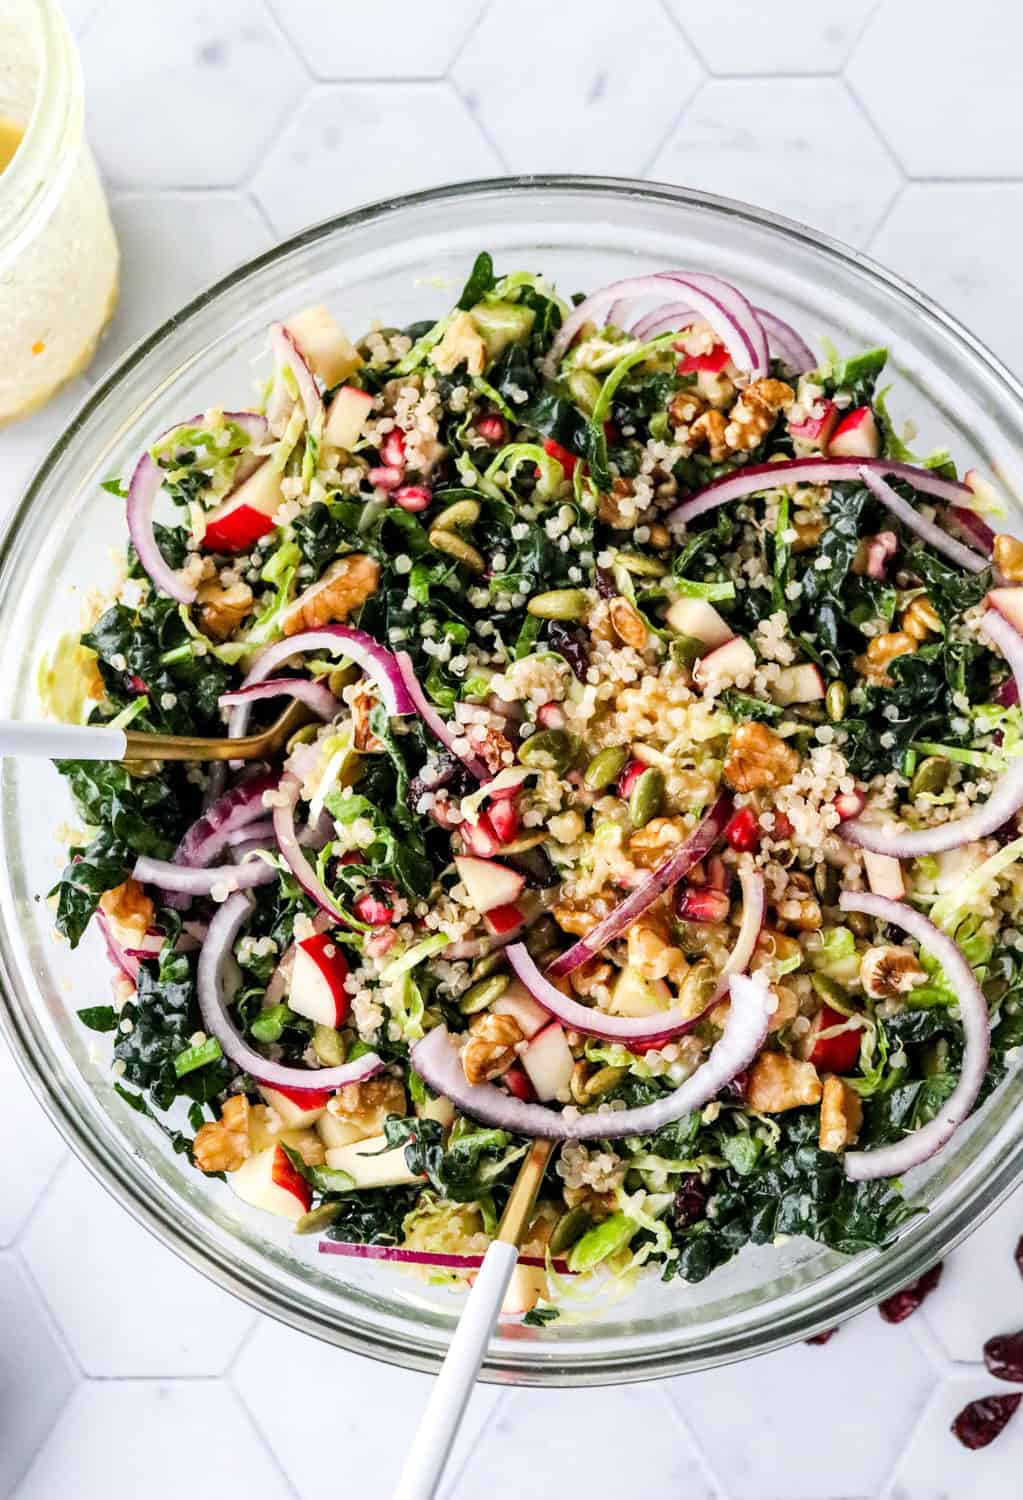 autumn kale salad with apple, sliced red onion, quinoa, nuts and seeds in a glass salad bowl with white and gold spoons in it on a marble countertop with a jar of dressing next to it. 